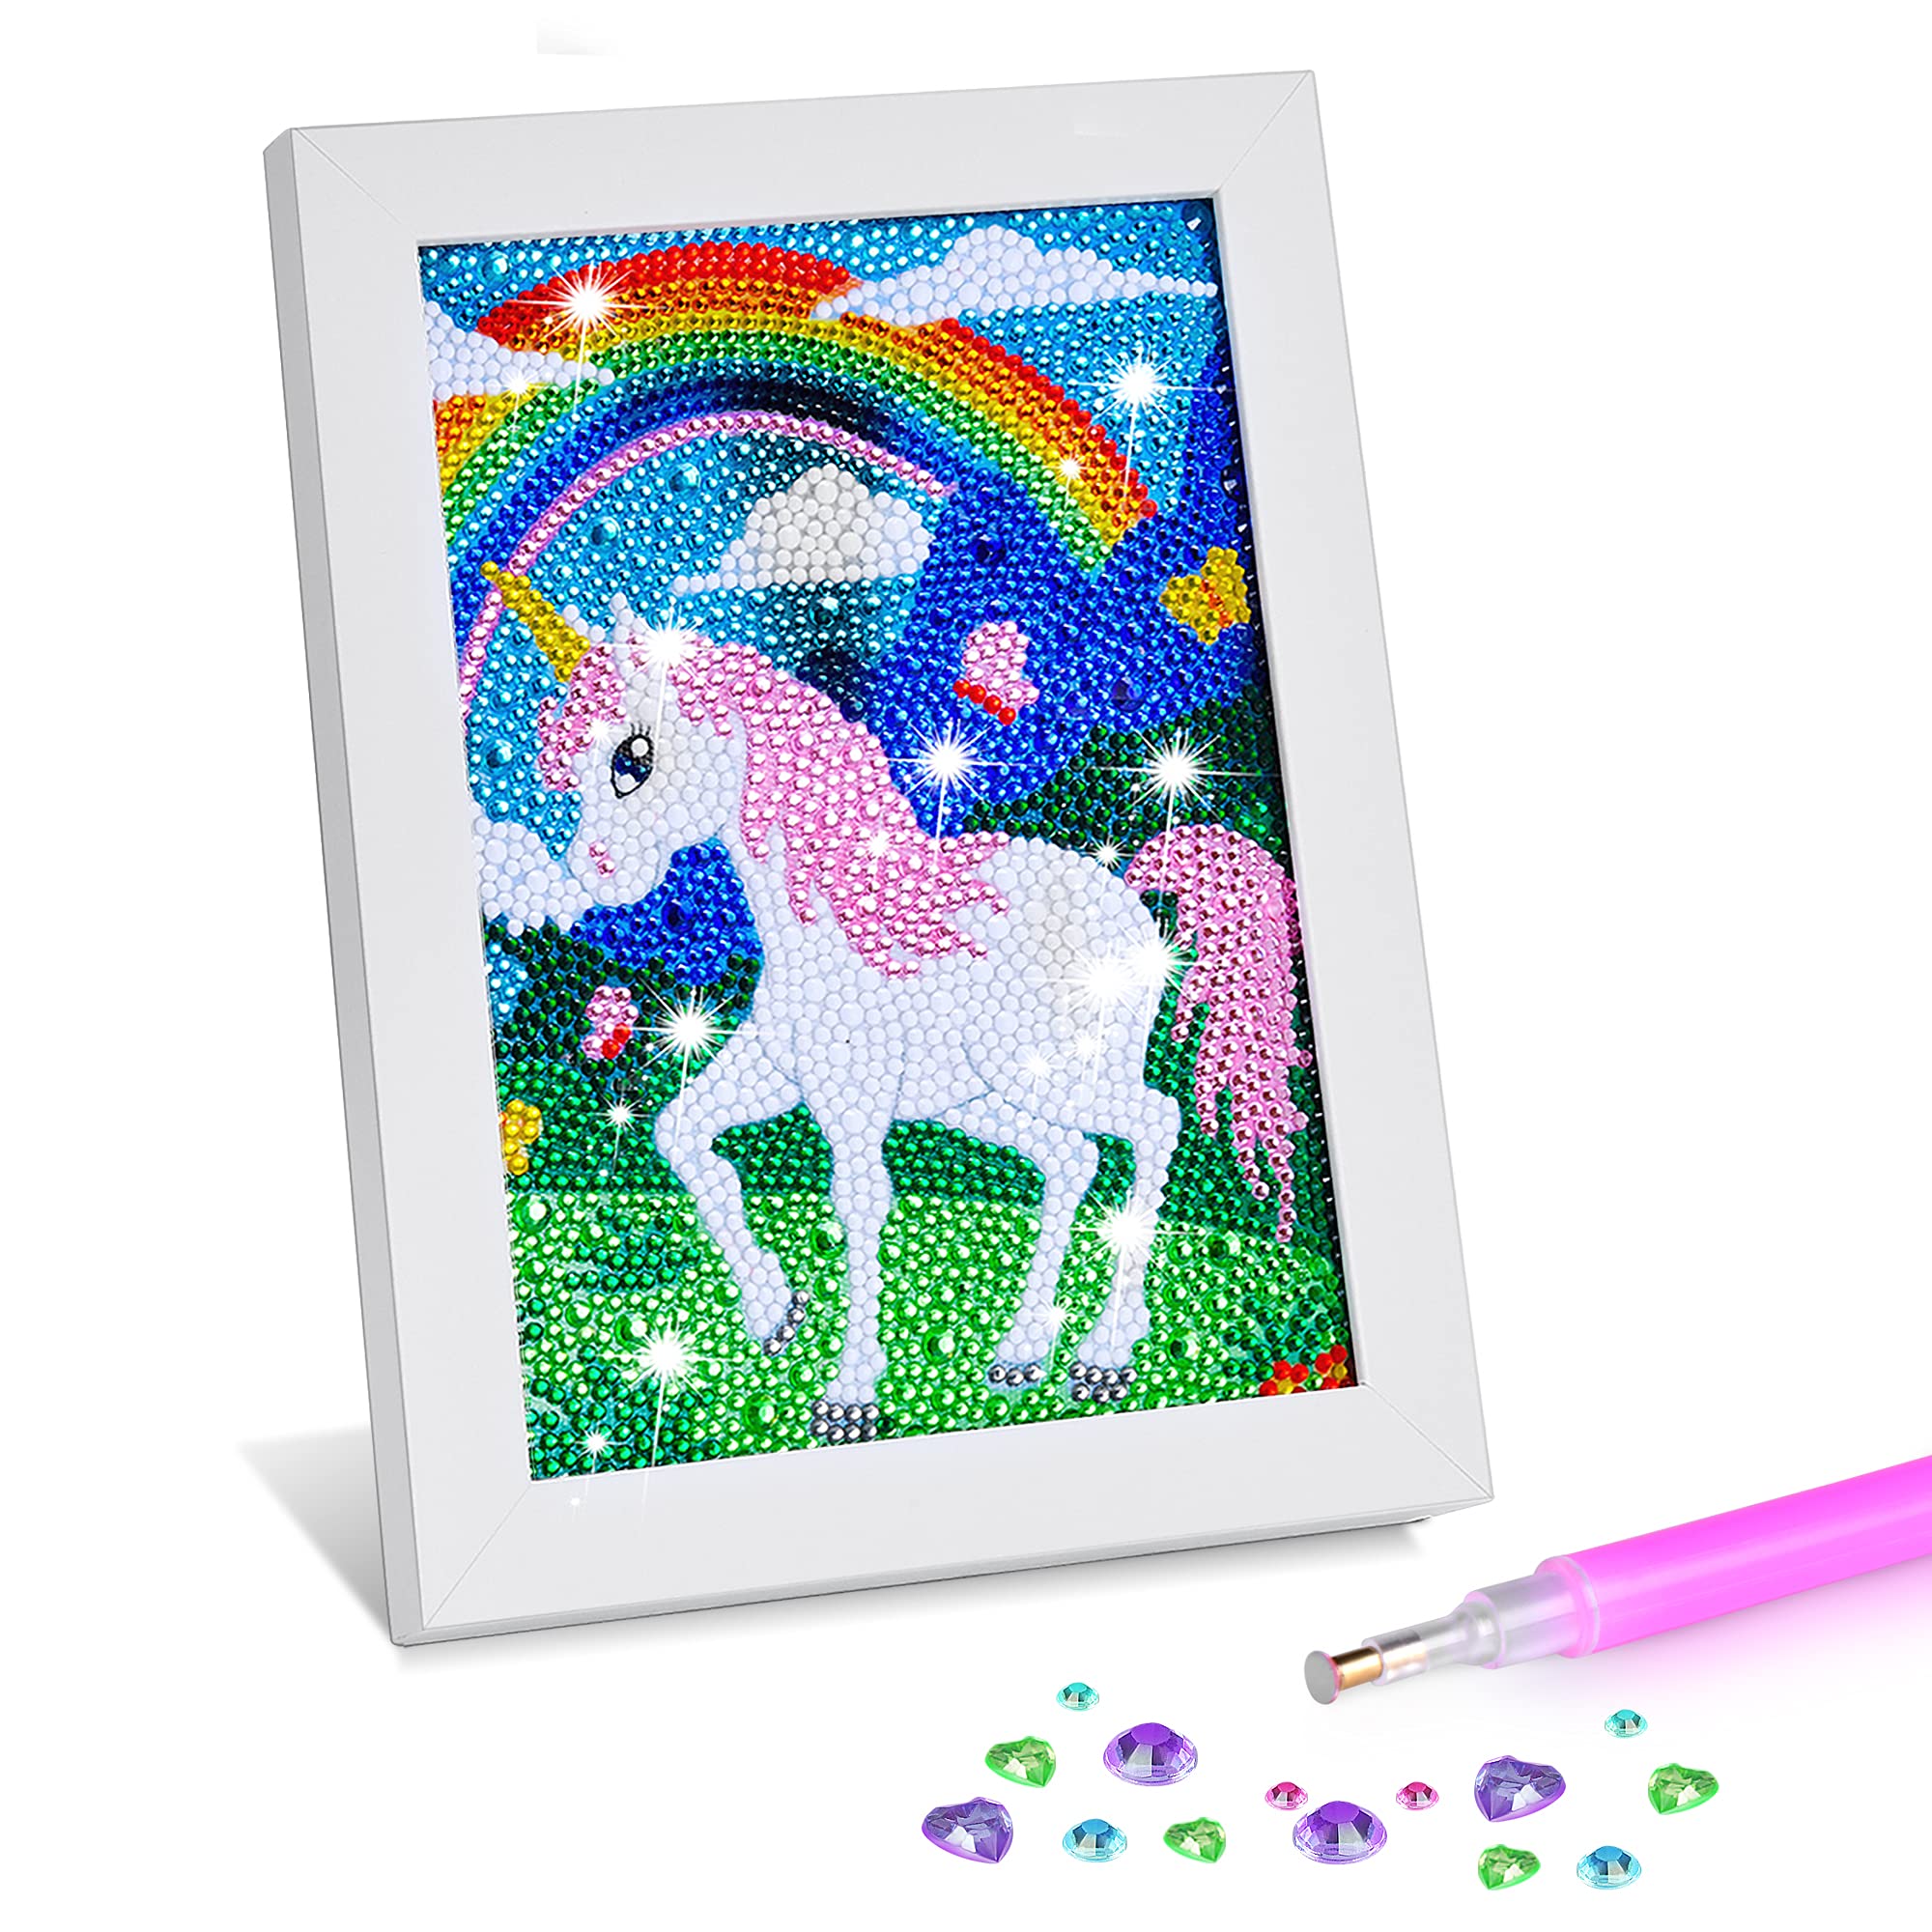 Diamond Painting Kits for Kids Age 6-12: Birthday Gifts for 7 8 9